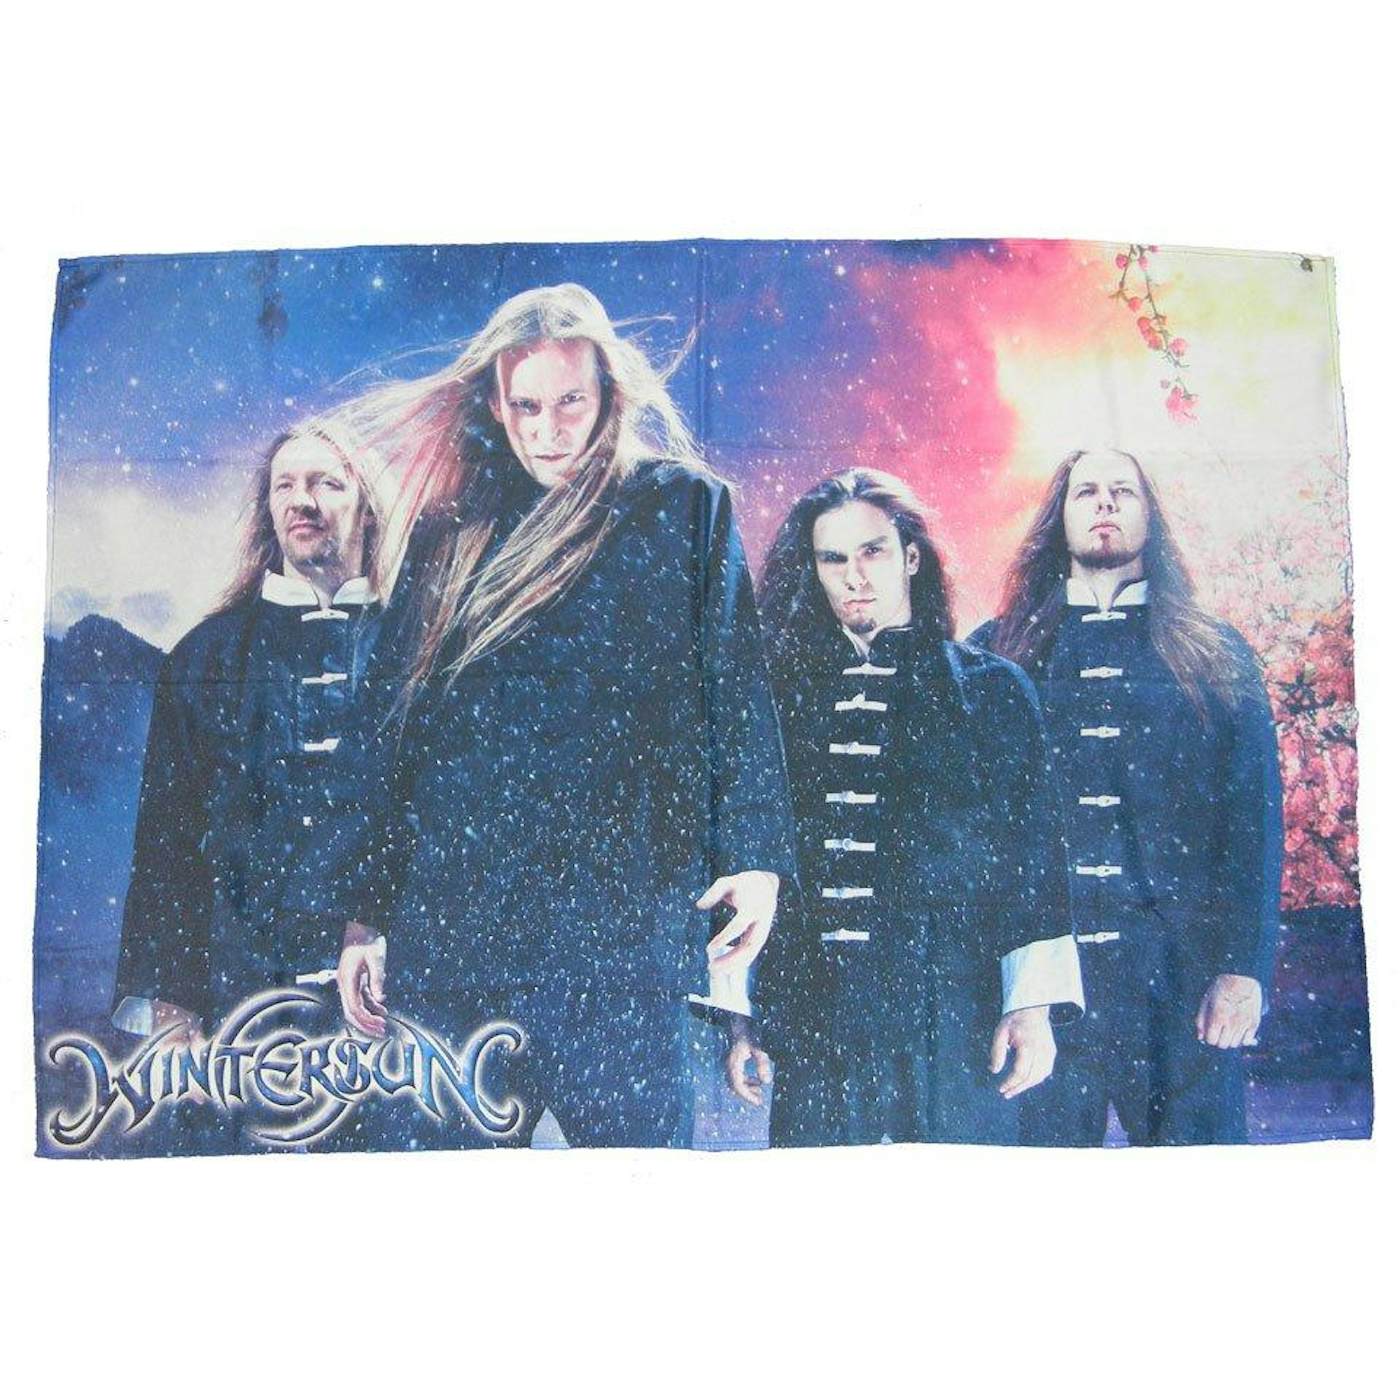 Wintersun Band Photo Poster Flag